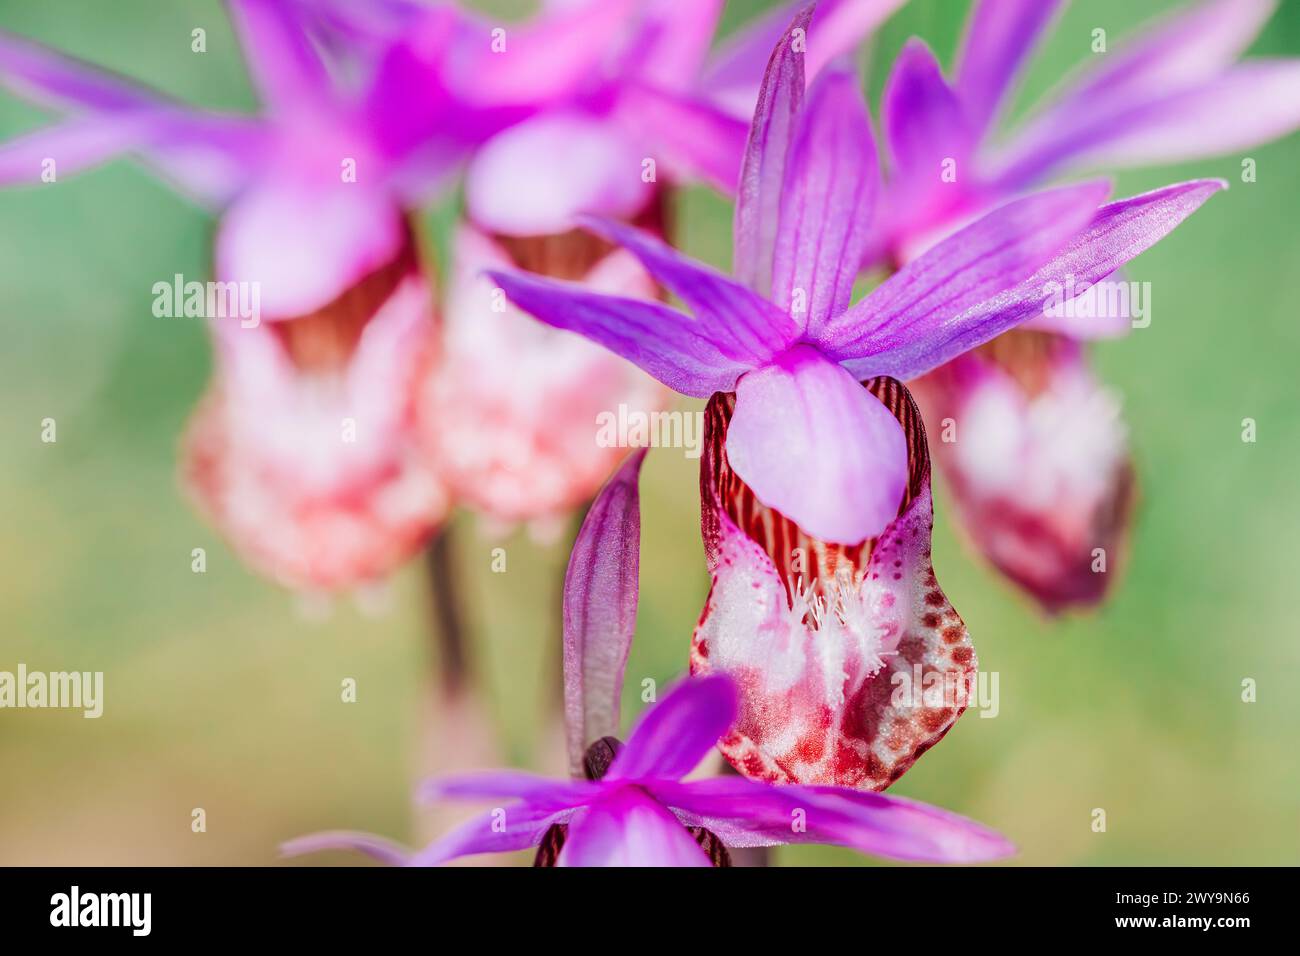 Group of several pink fairy slipper wild orchids Stock Photo